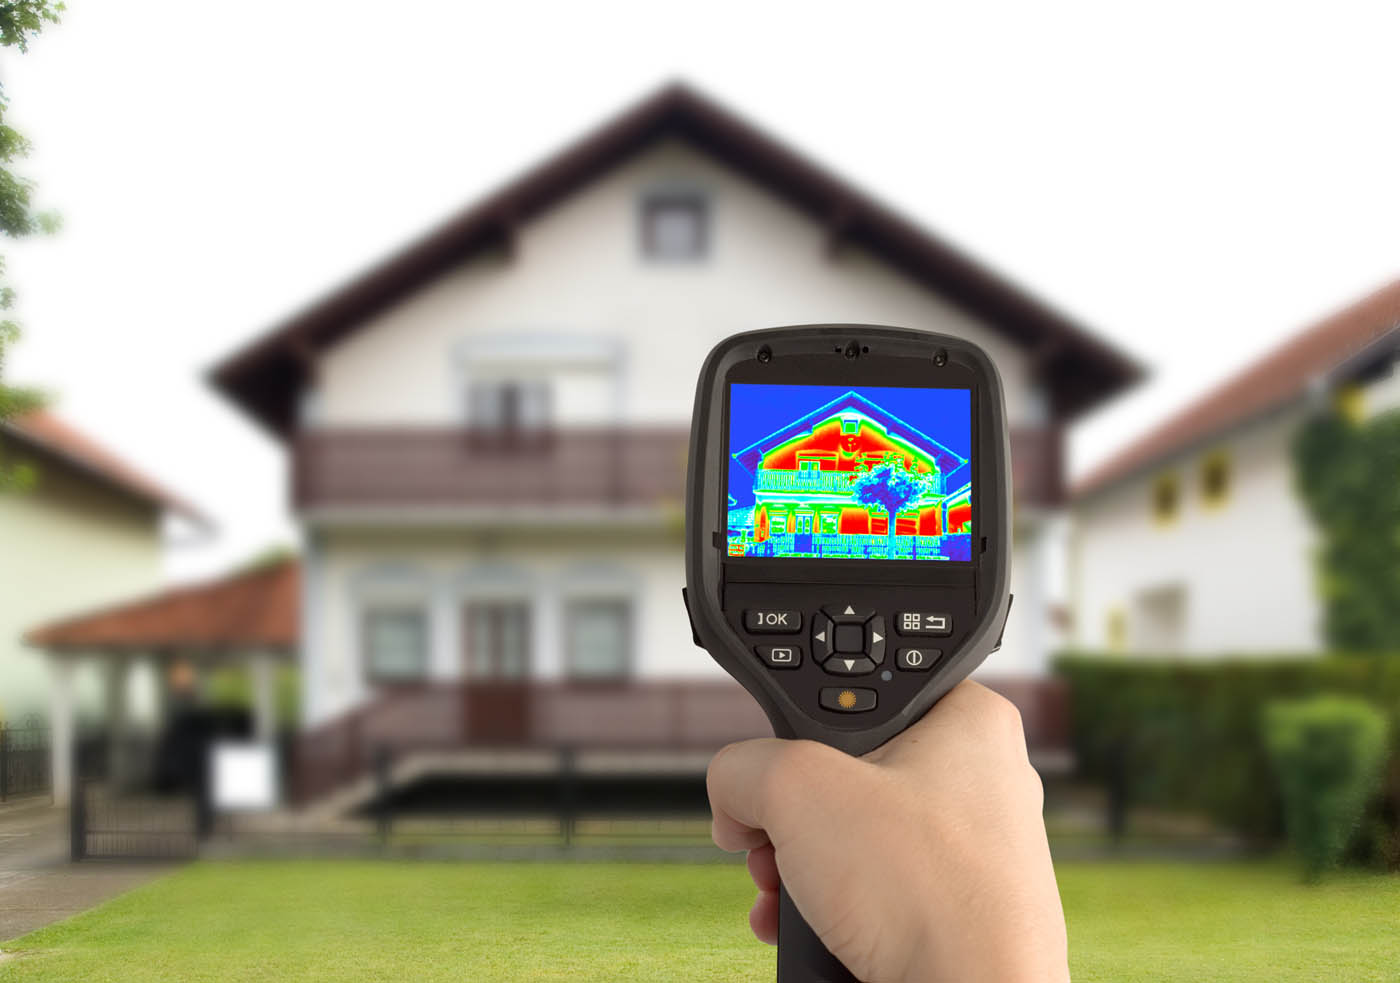 A heat gun measuring the quality of homes protection, contact us today for foam insulation services.